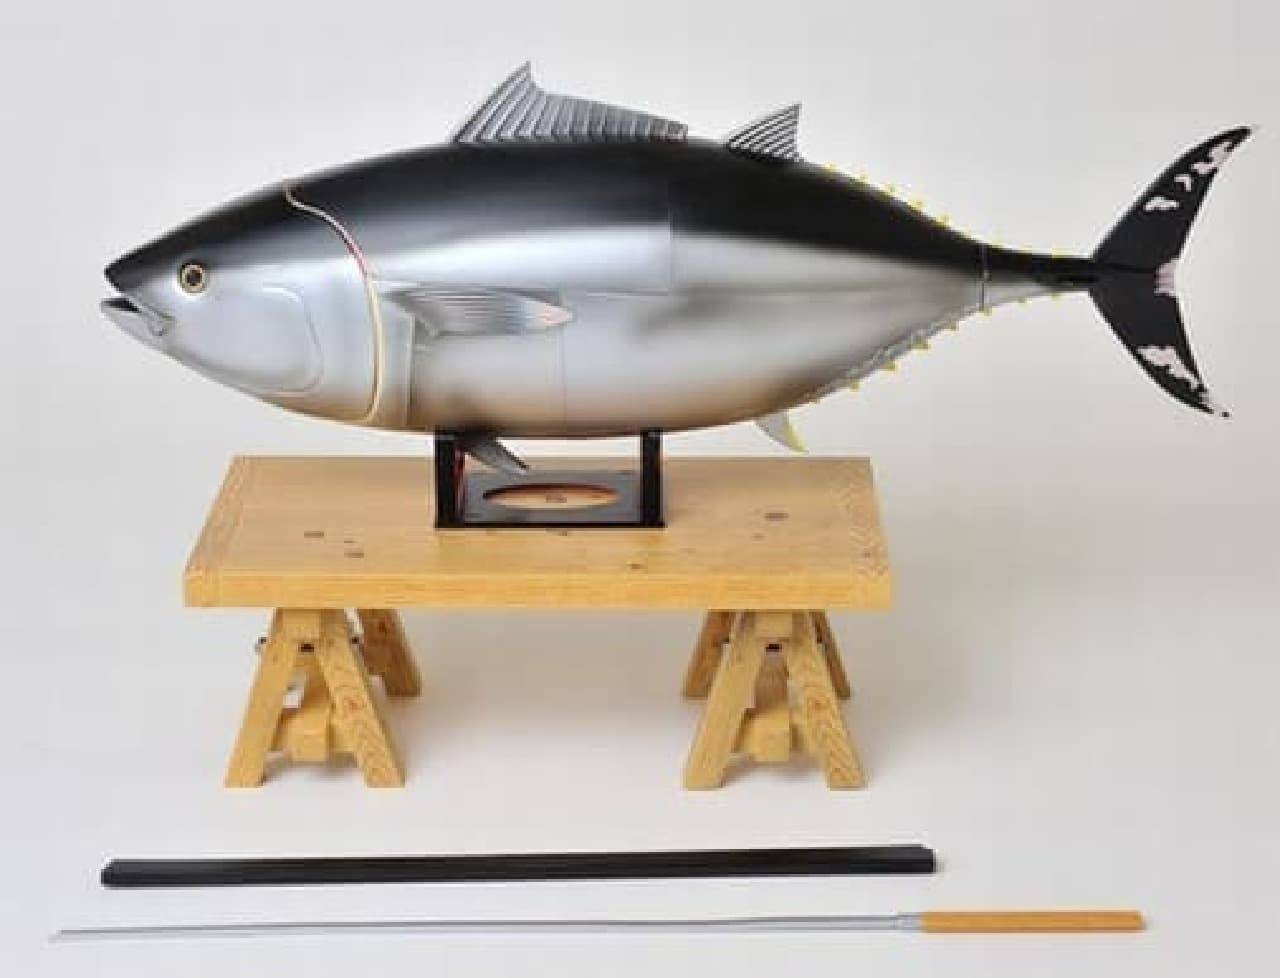 "Dismantling figure, bluefin tuna" is now on sale